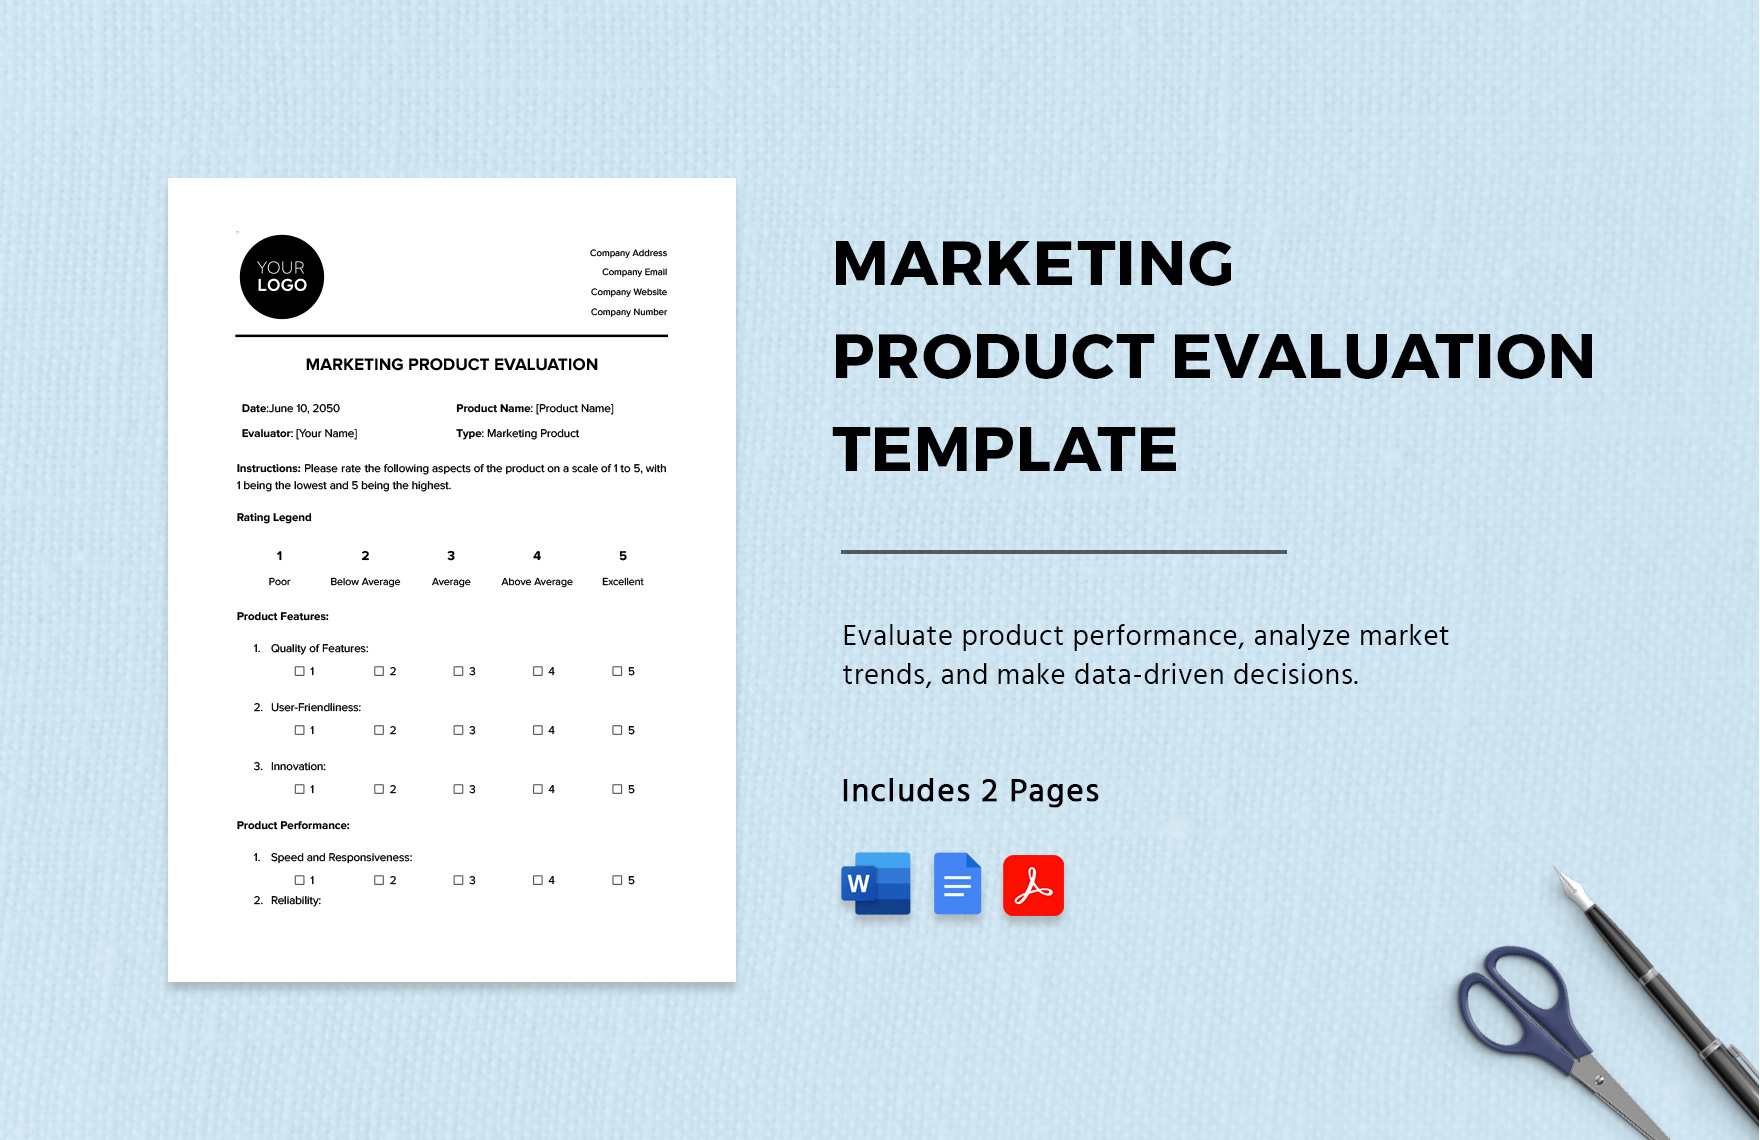 Marketing Product Evaluation Template in Word, Google Docs, PDF